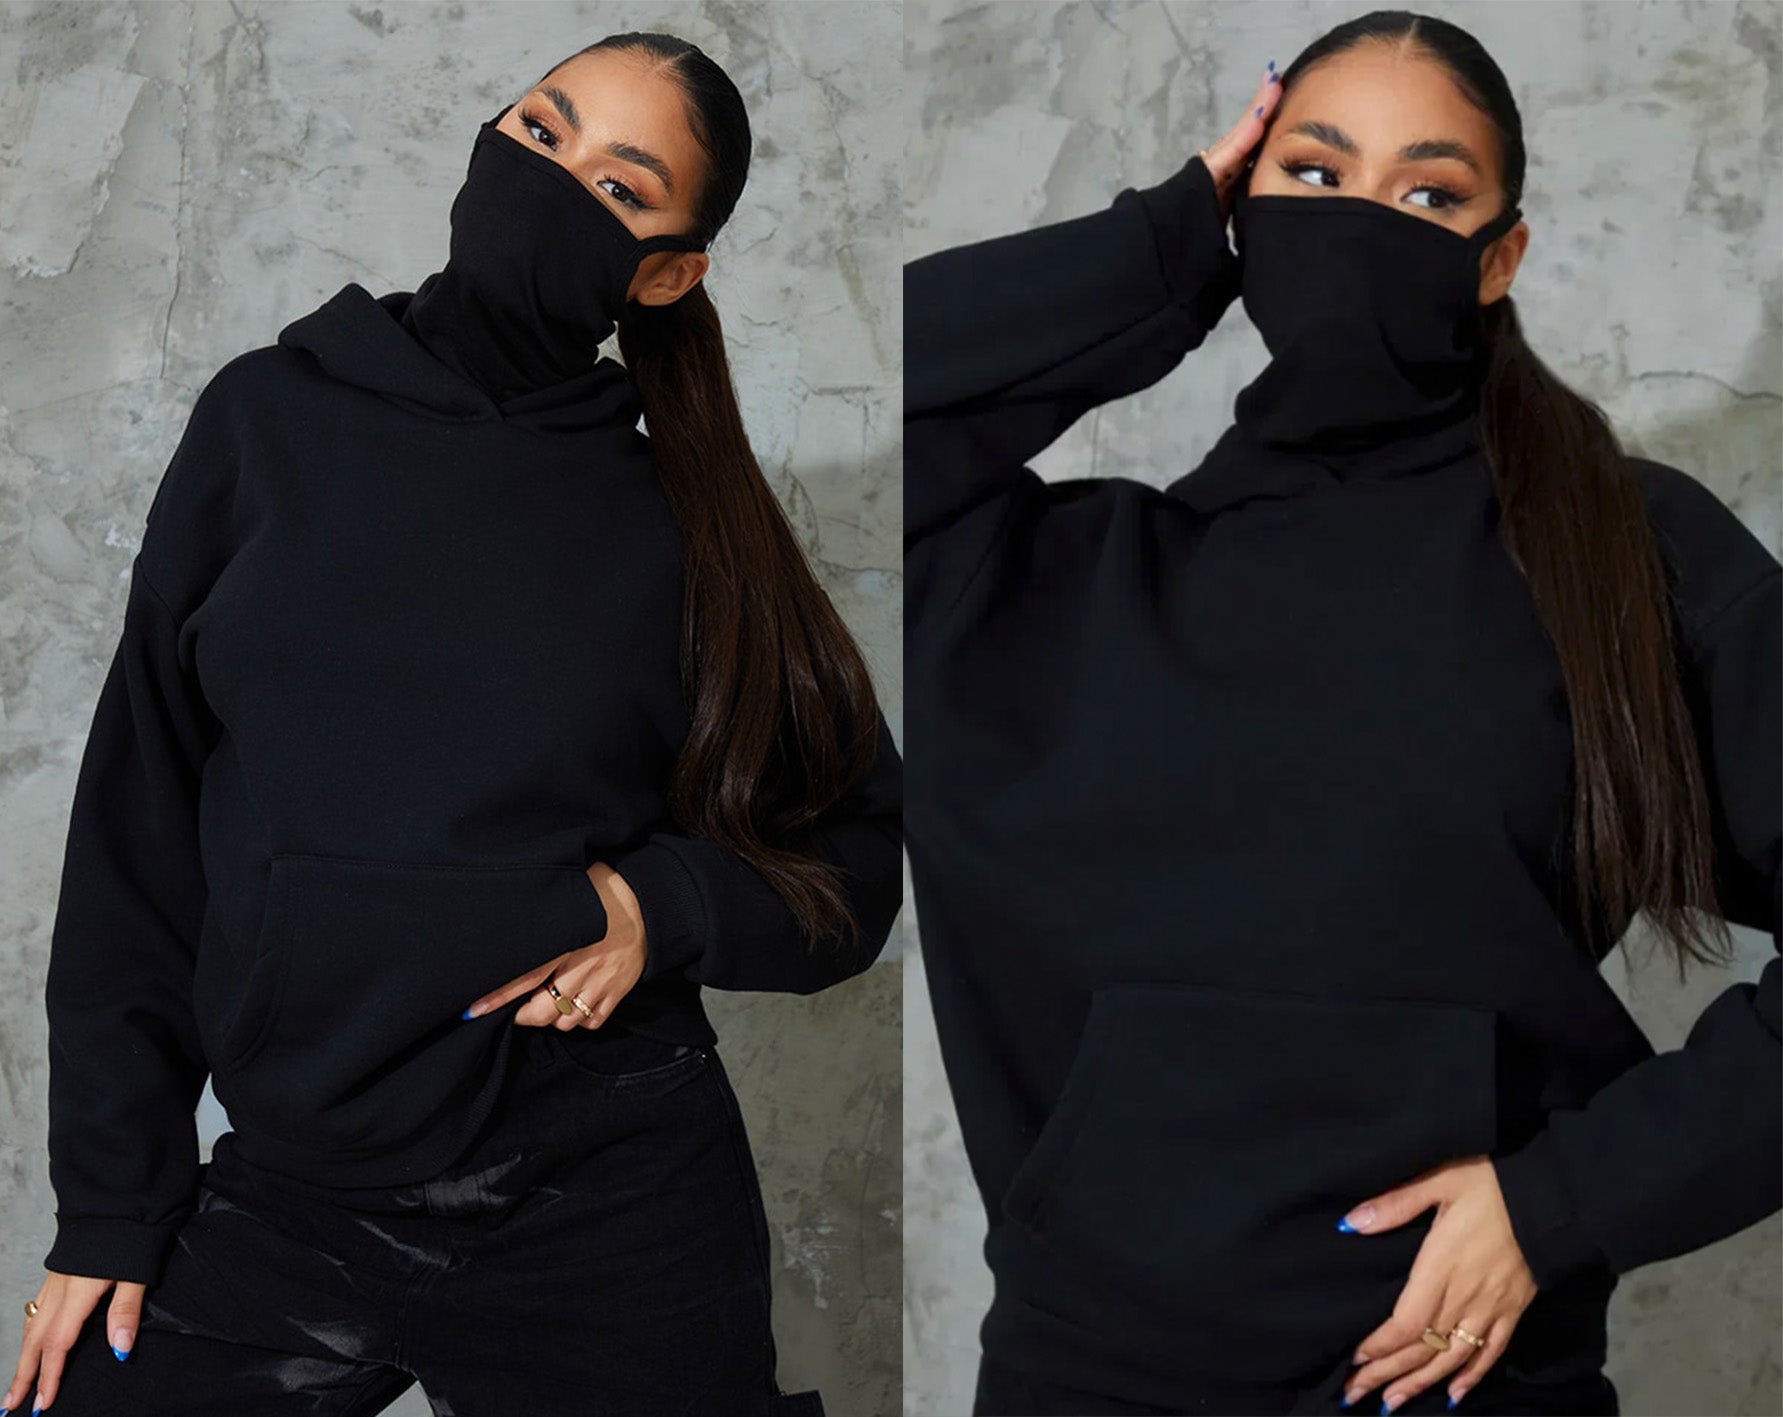 PrettyLittleThing selling £16 'mask hoodie' with built-in face covering